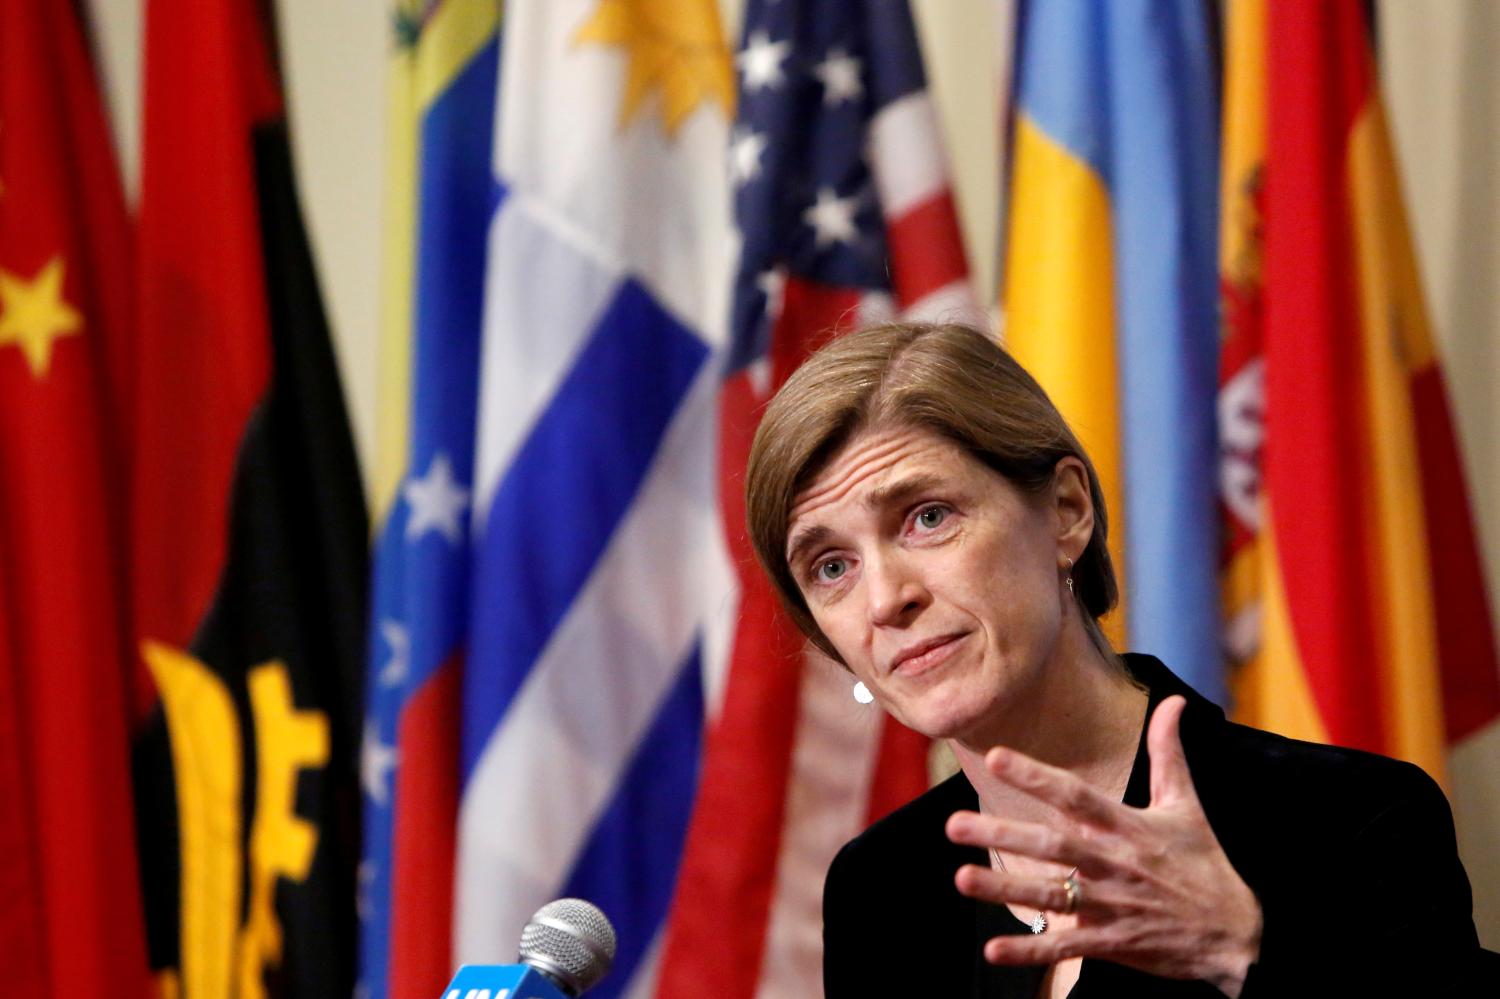 FILE PHOTO: Then-U.S. Ambassador to the United Nations Samantha Power addresses media at the United Nations in Manhattan, New York City, U.S., December 19, 2016. REUTERS/Andrew Kelly/File Photo